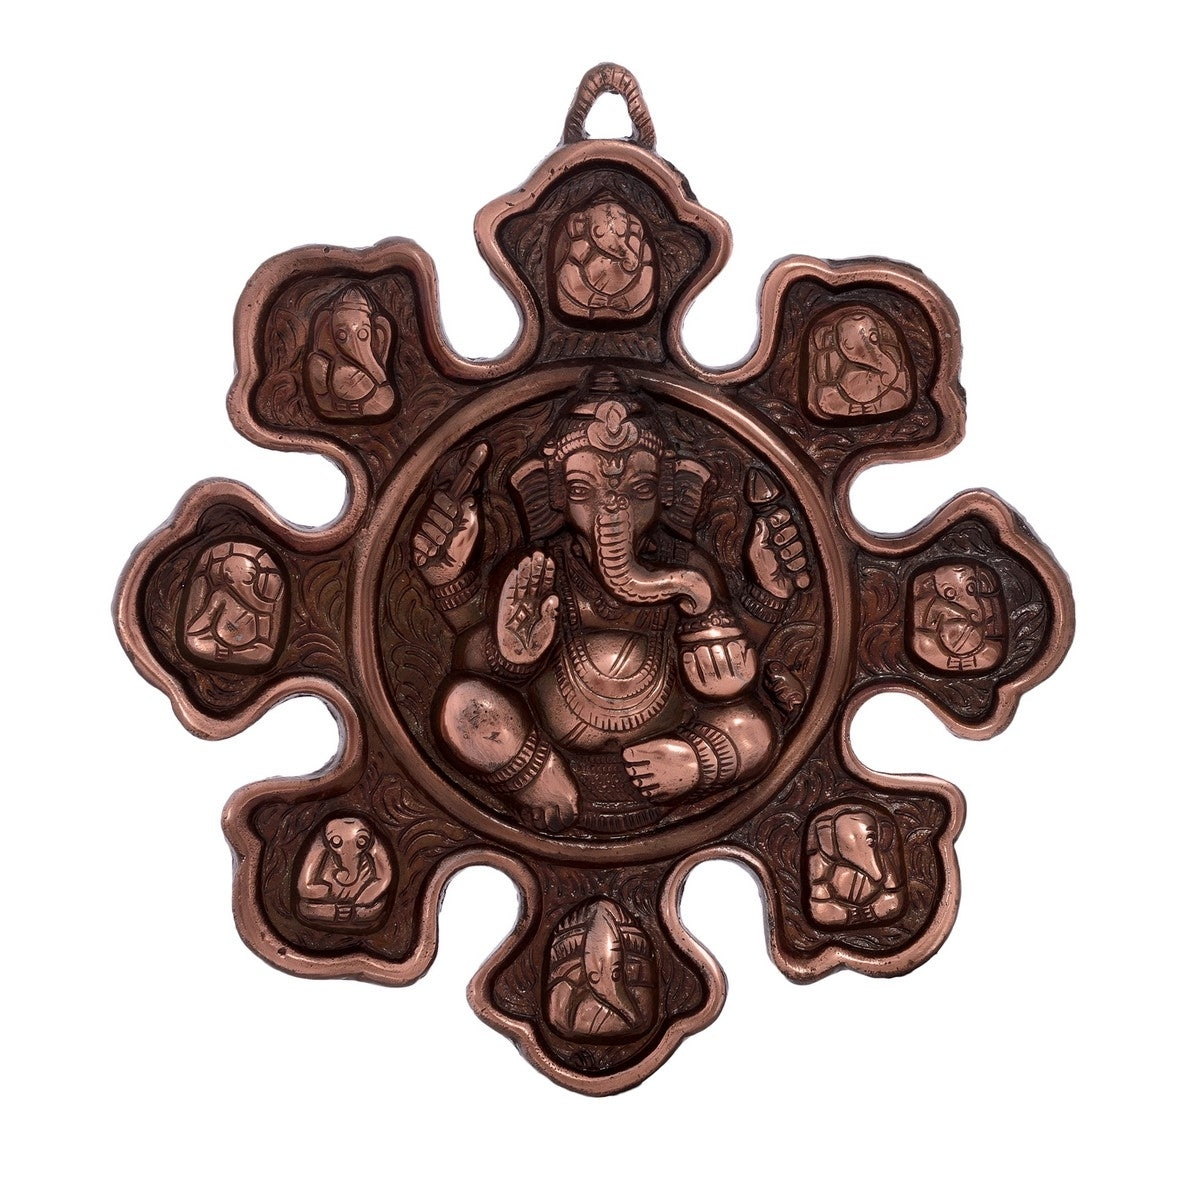 Metal Wall hanging with 9 variants of Lord Ganesha